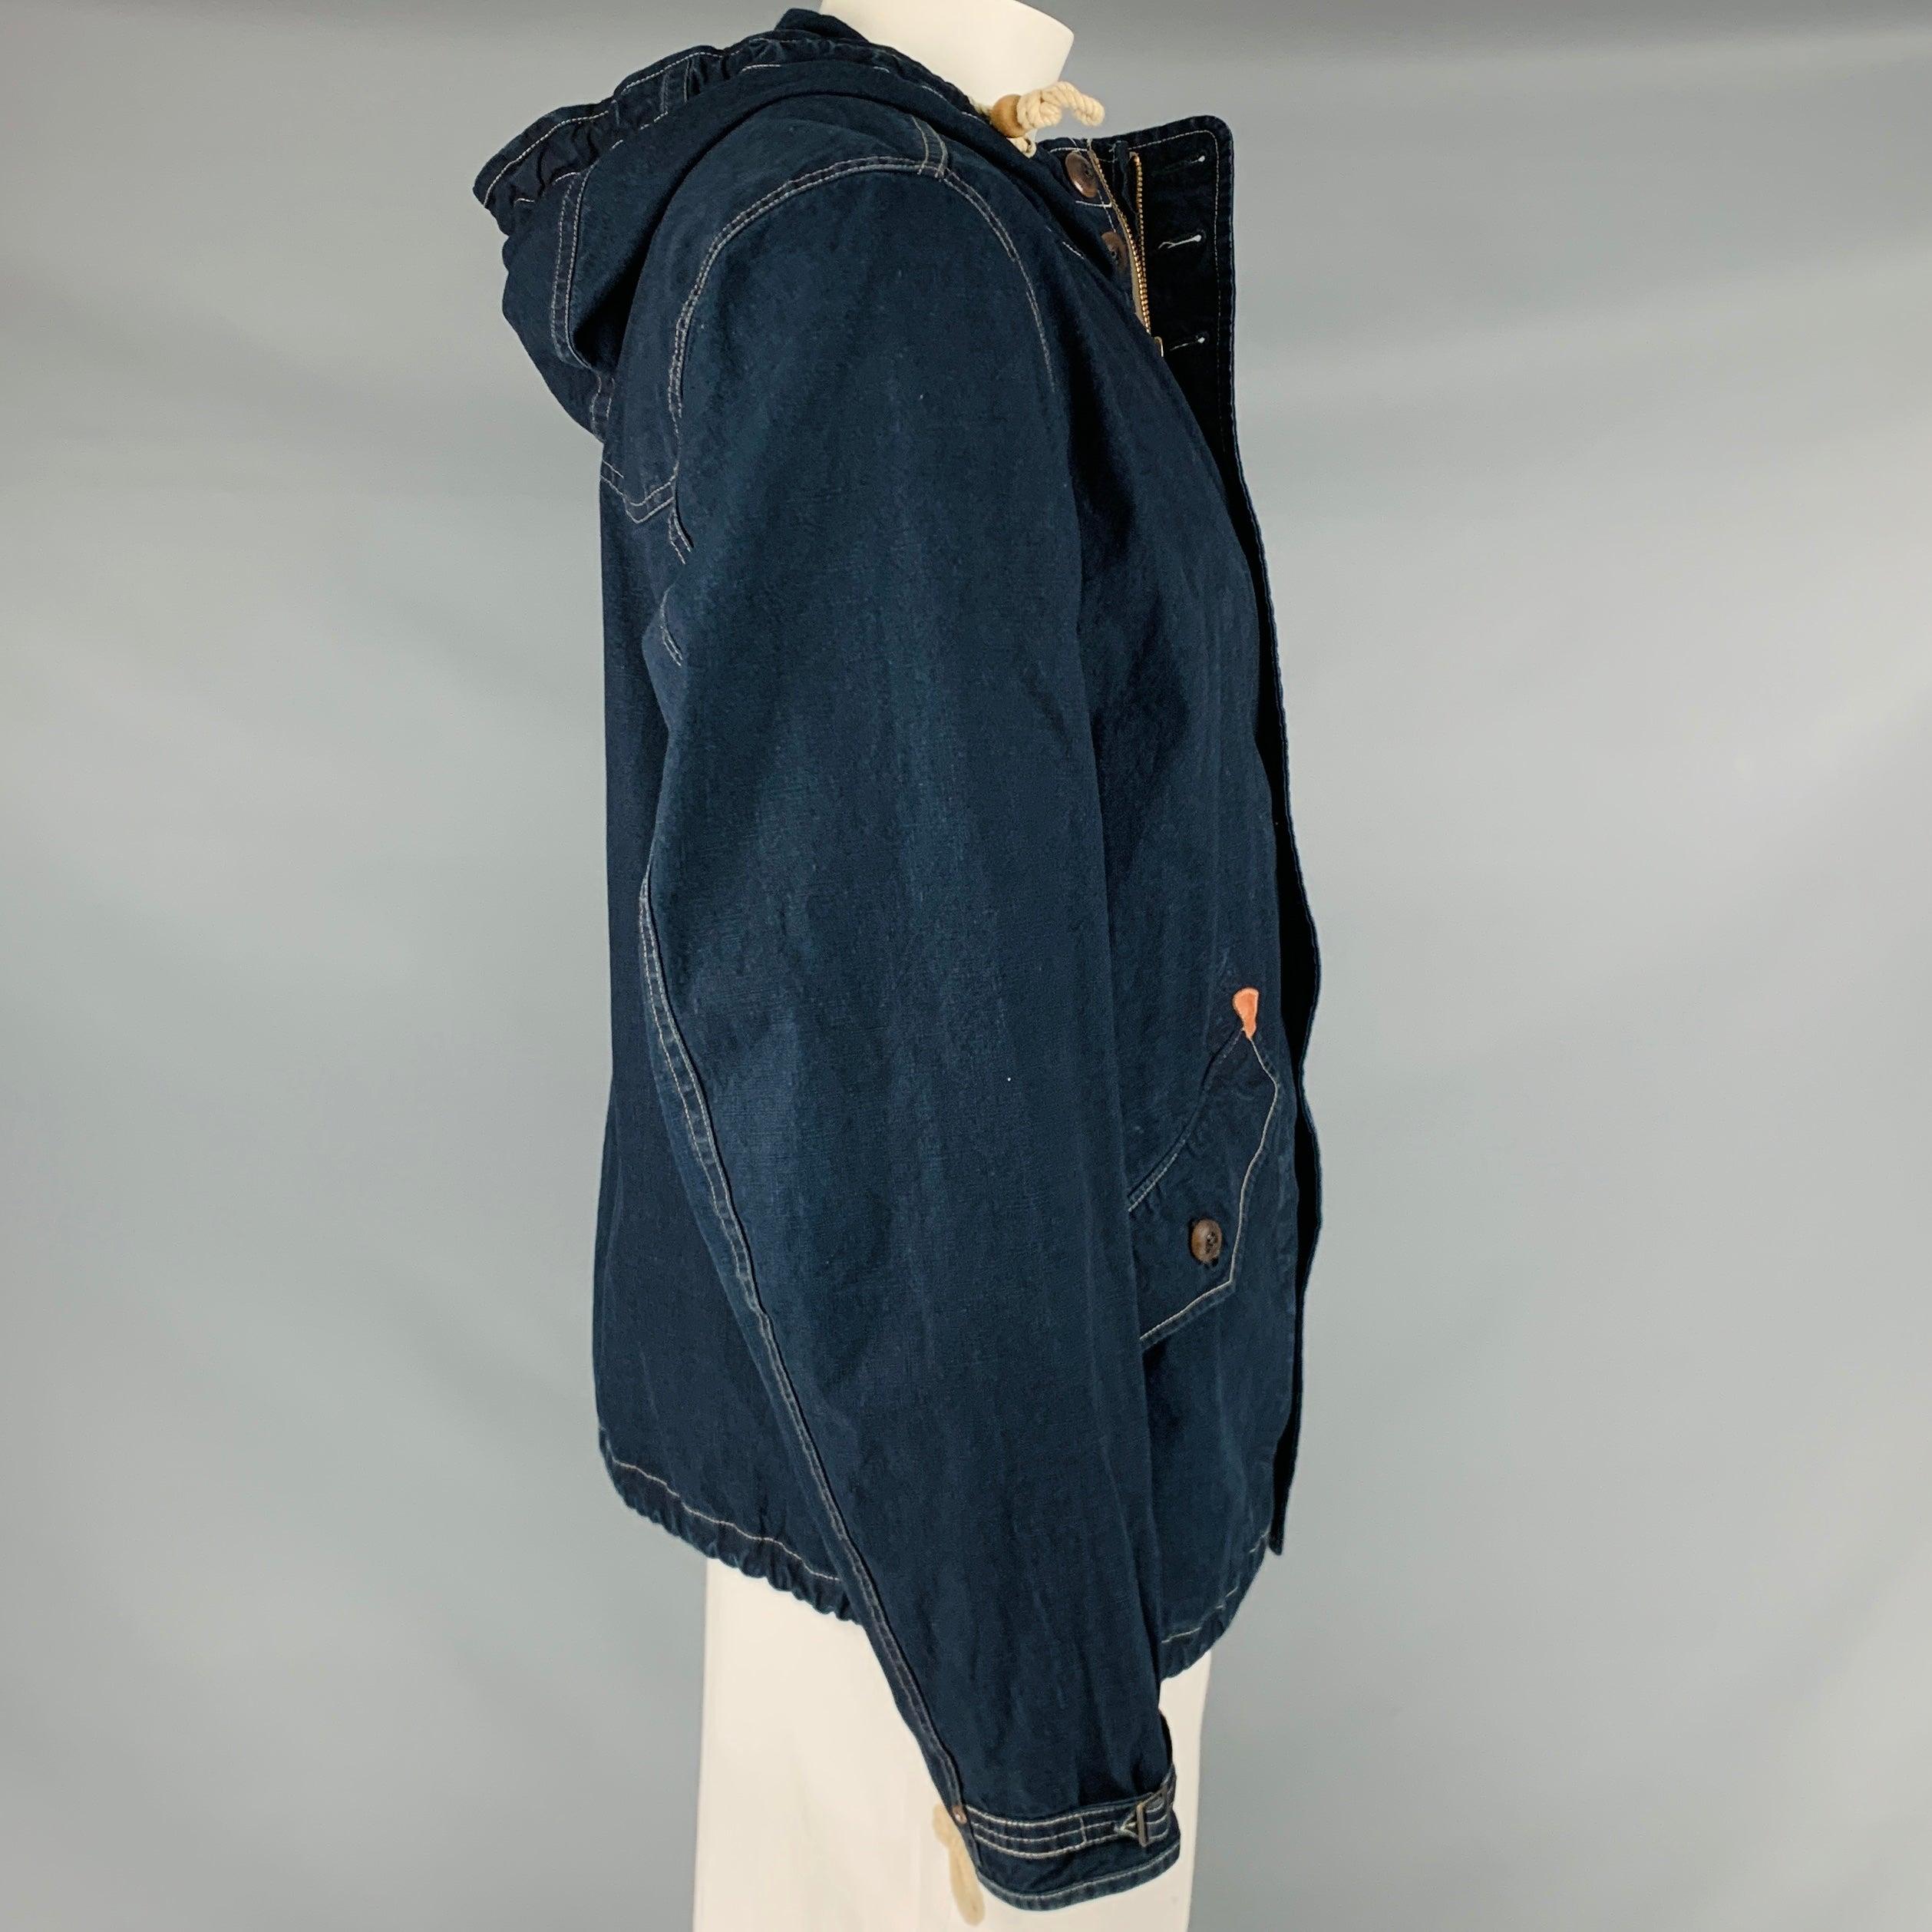 RRL by RALPH LAUREN jacket
in an indigo cotton fabric featuring a hooded style, two large button pockets with leather details, and zip up & button closure. Very Good Pre-Owned Condition. Minor signs of wear. 

Marked:   L 

Measurements: 
